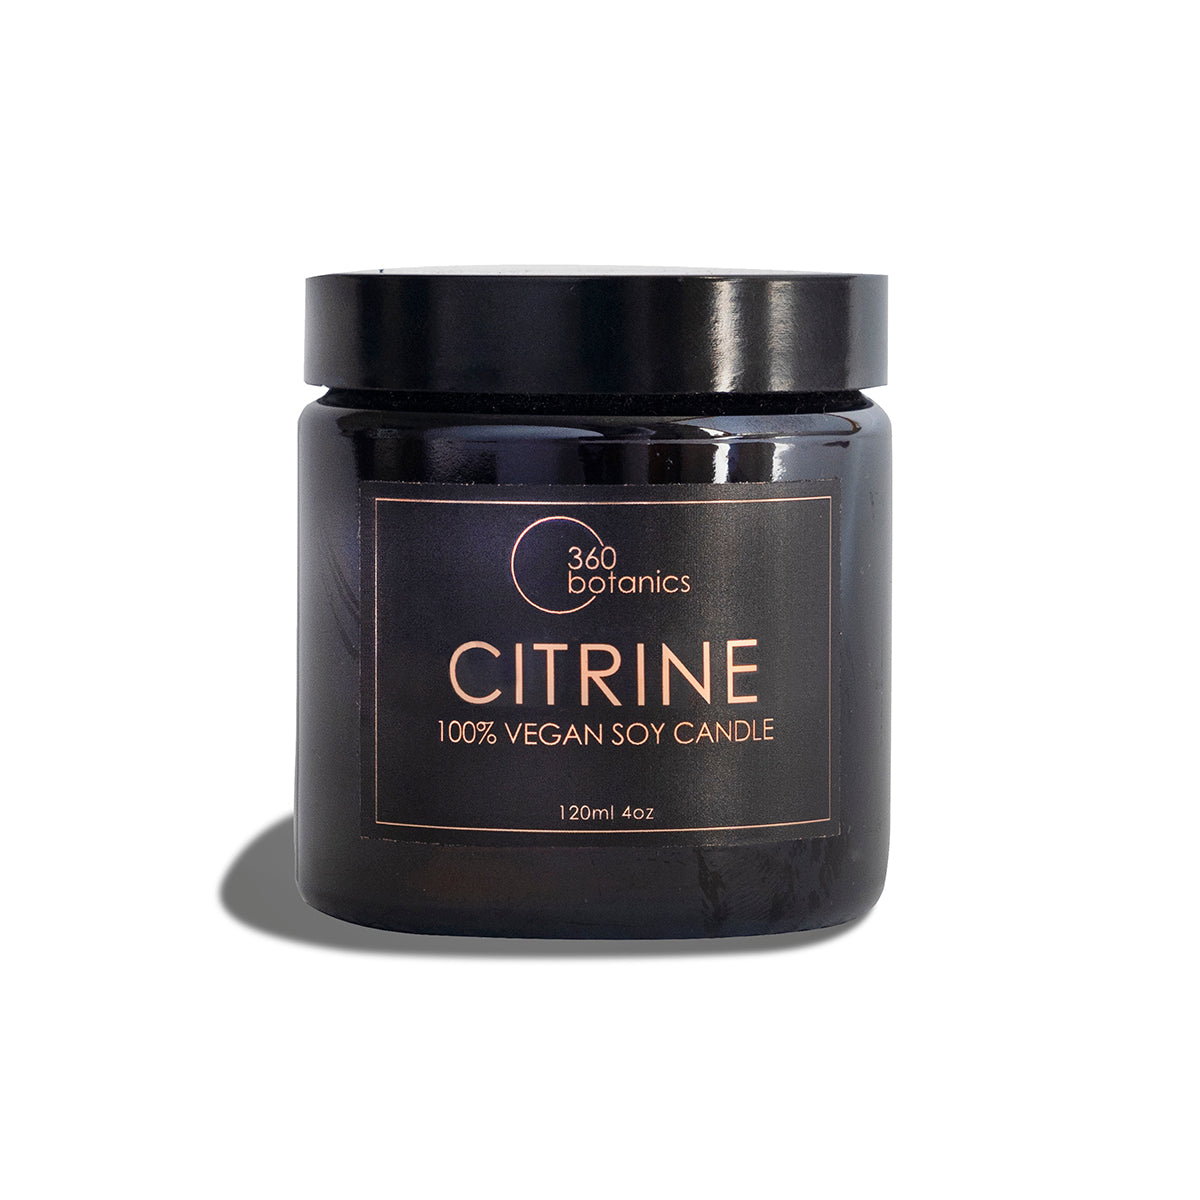 Citrine - Grapefruit & Vetiver Scented Soy Candle